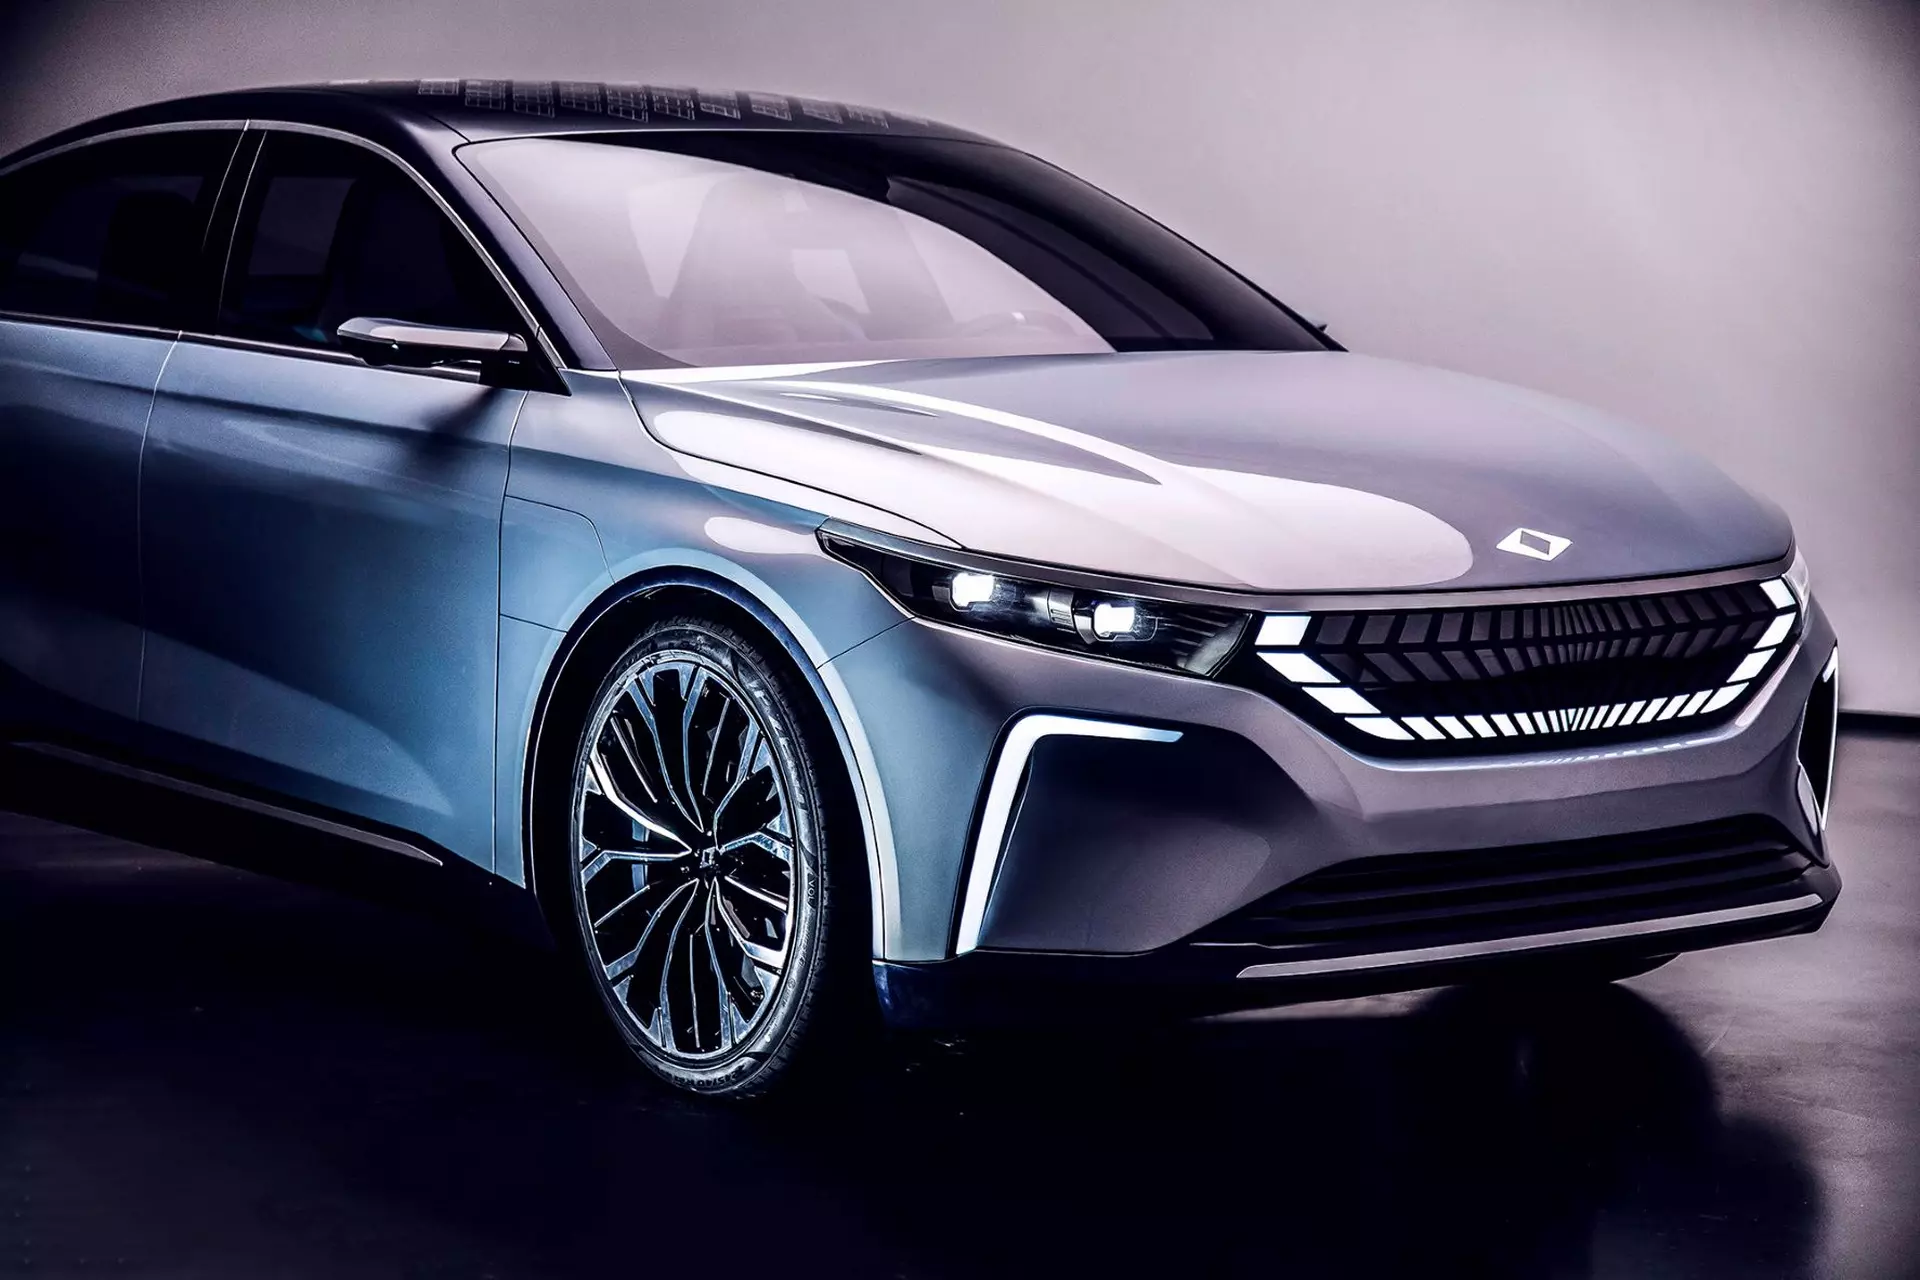 Turkish EV TOGG Sedan Features Announced, What's the Price?